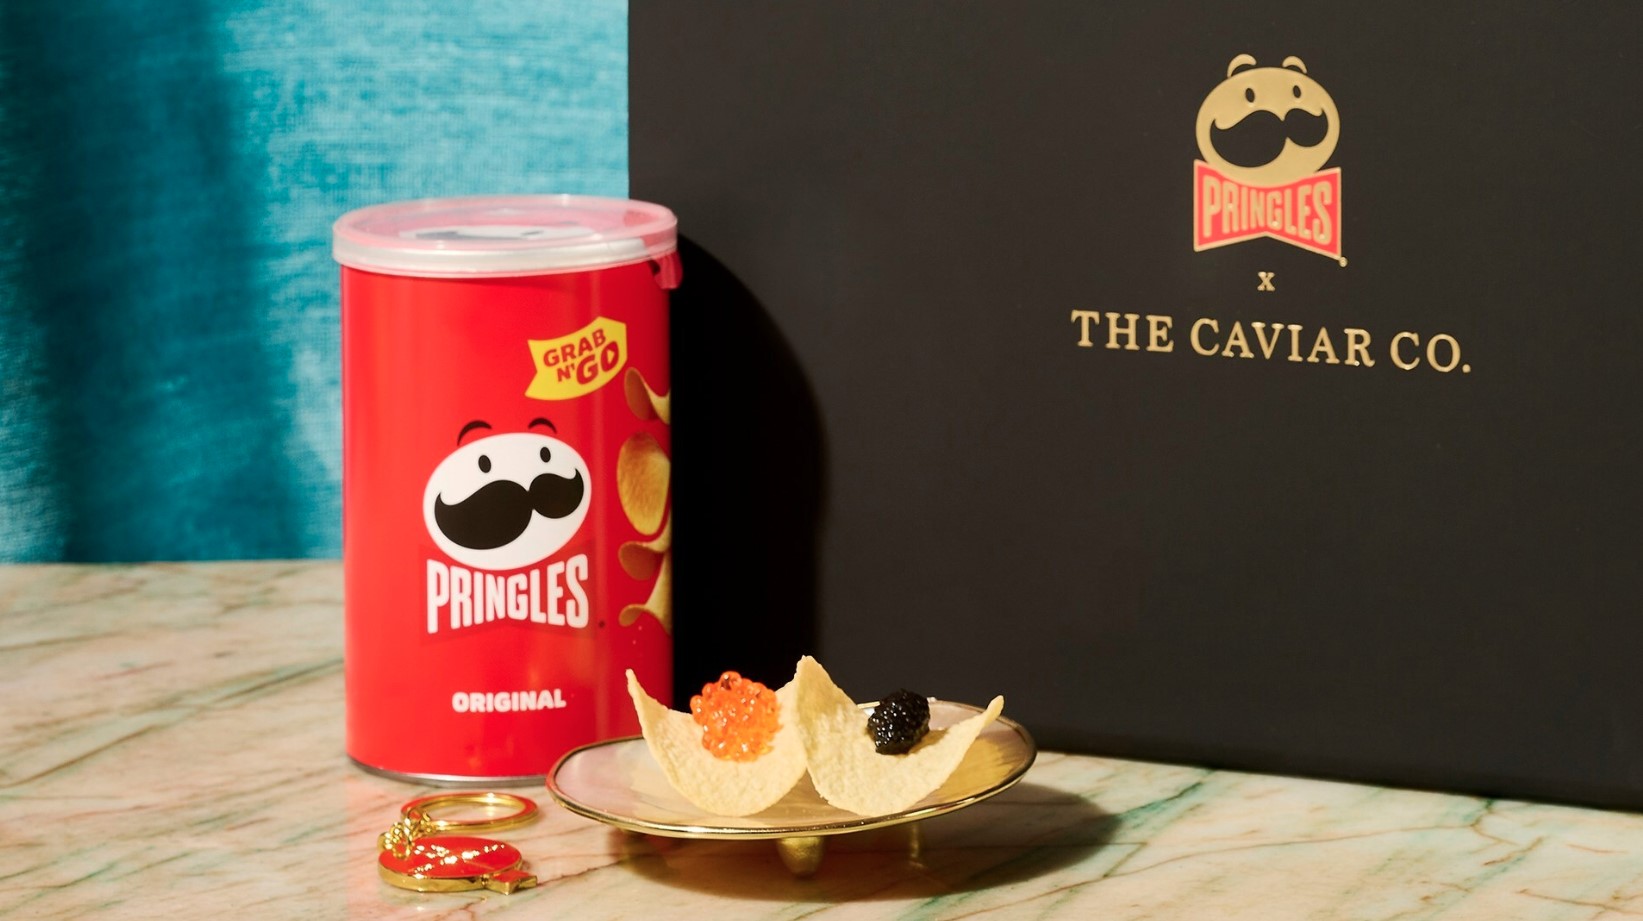 The Caviar Co. Teams Up With Pringles After Unique Pairing Goes Viral on TikTok